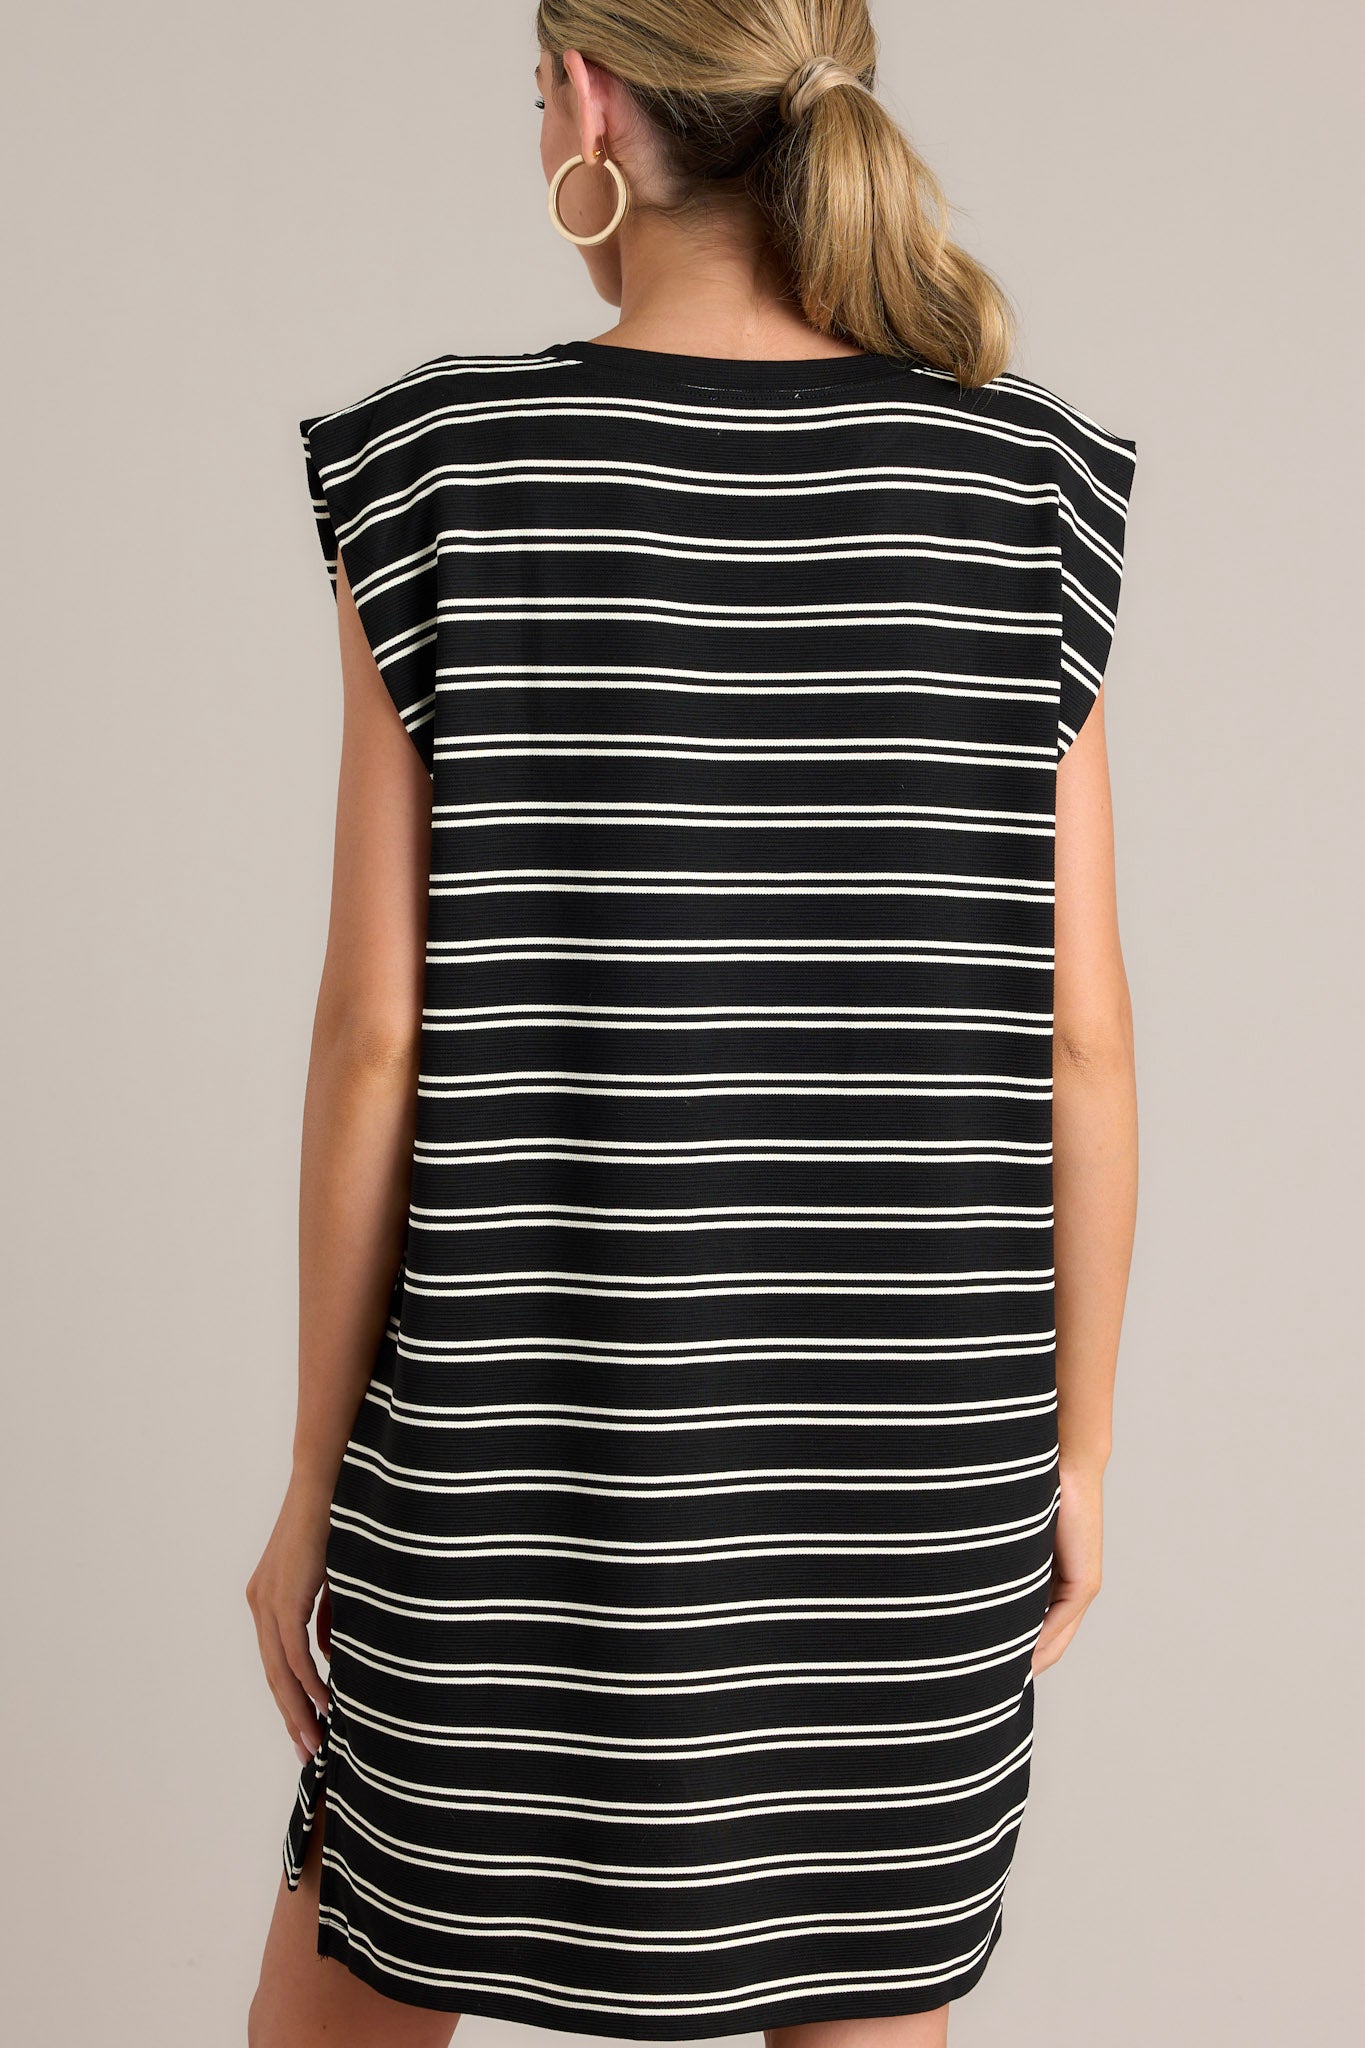 Back view of this black stripe mini dress that features a crew neckline, short cap sleeves, a double stripe pattern, functional hip pockets, and a split hemline.